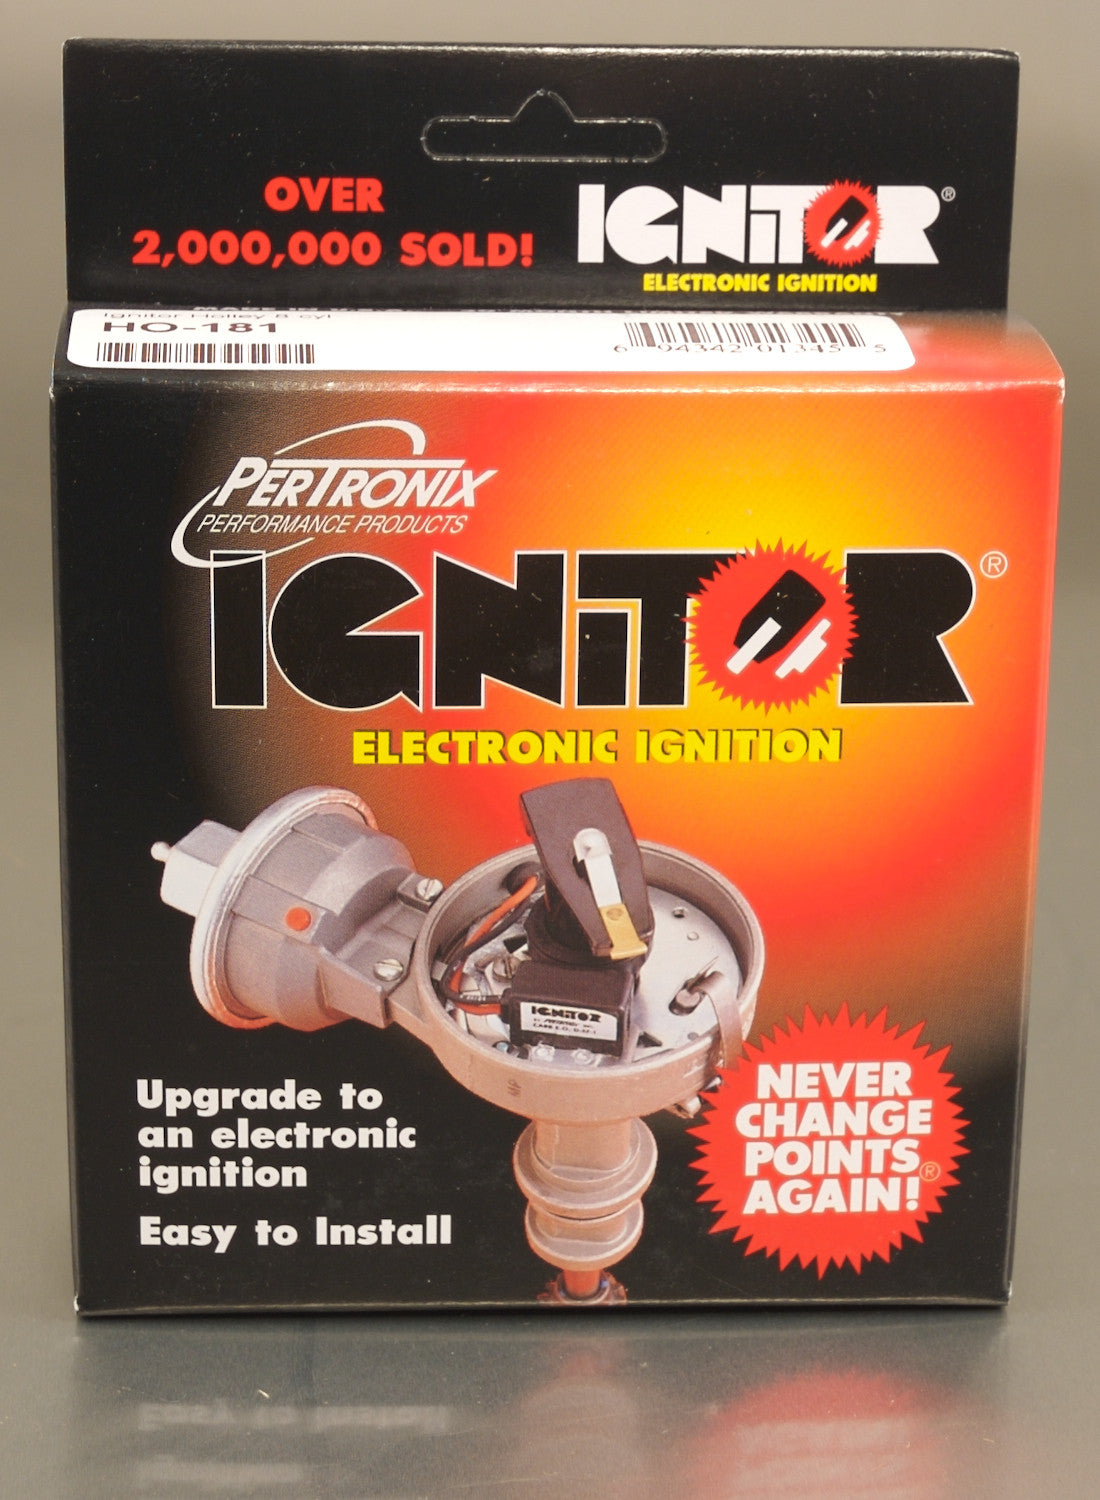 Pertronix Ignition - Scout II ('76-'77, Gold box)